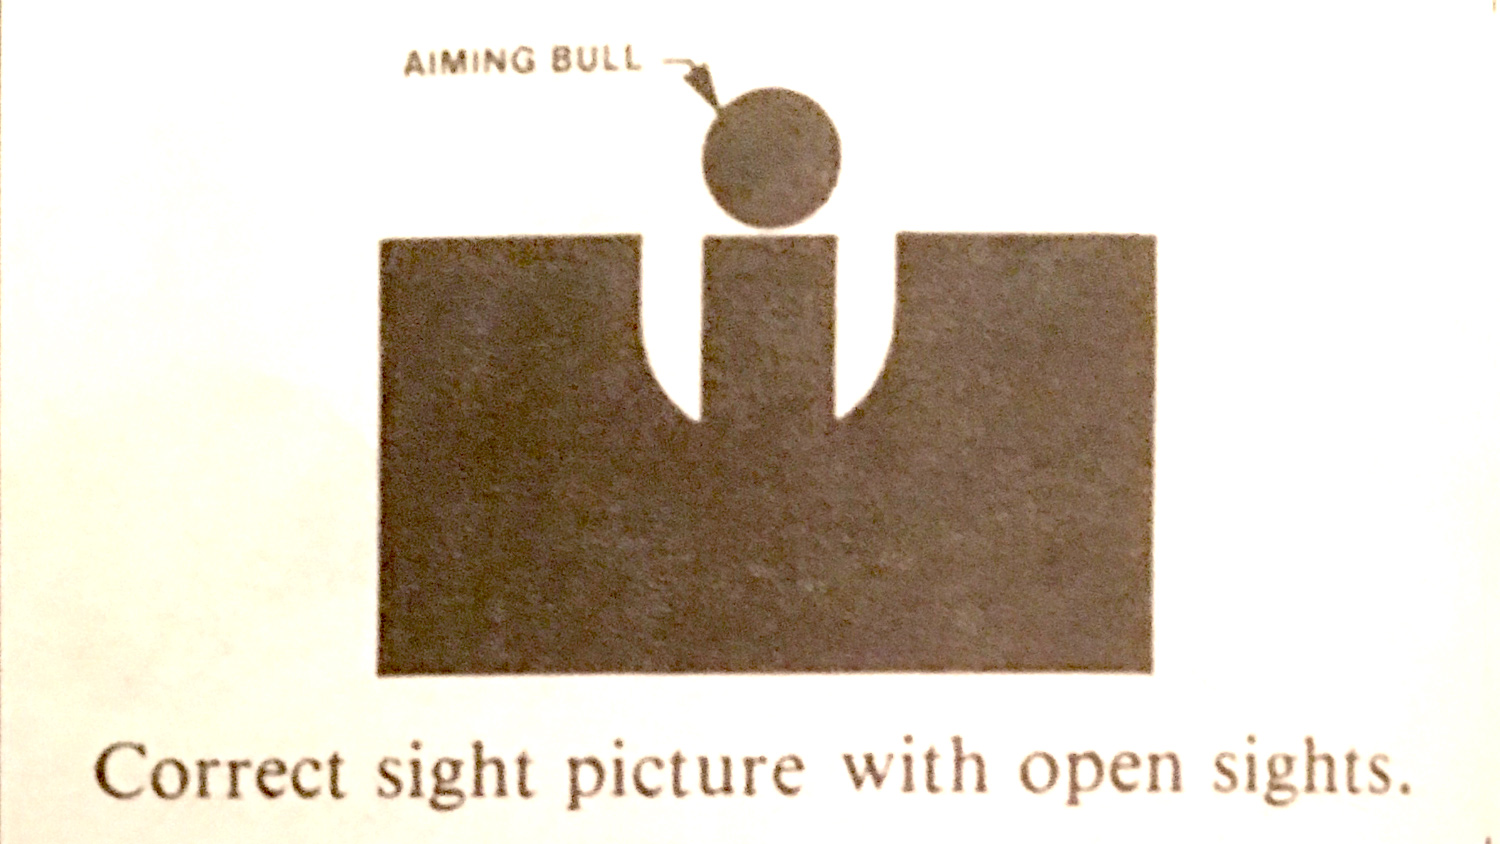 Rifle open sight picture